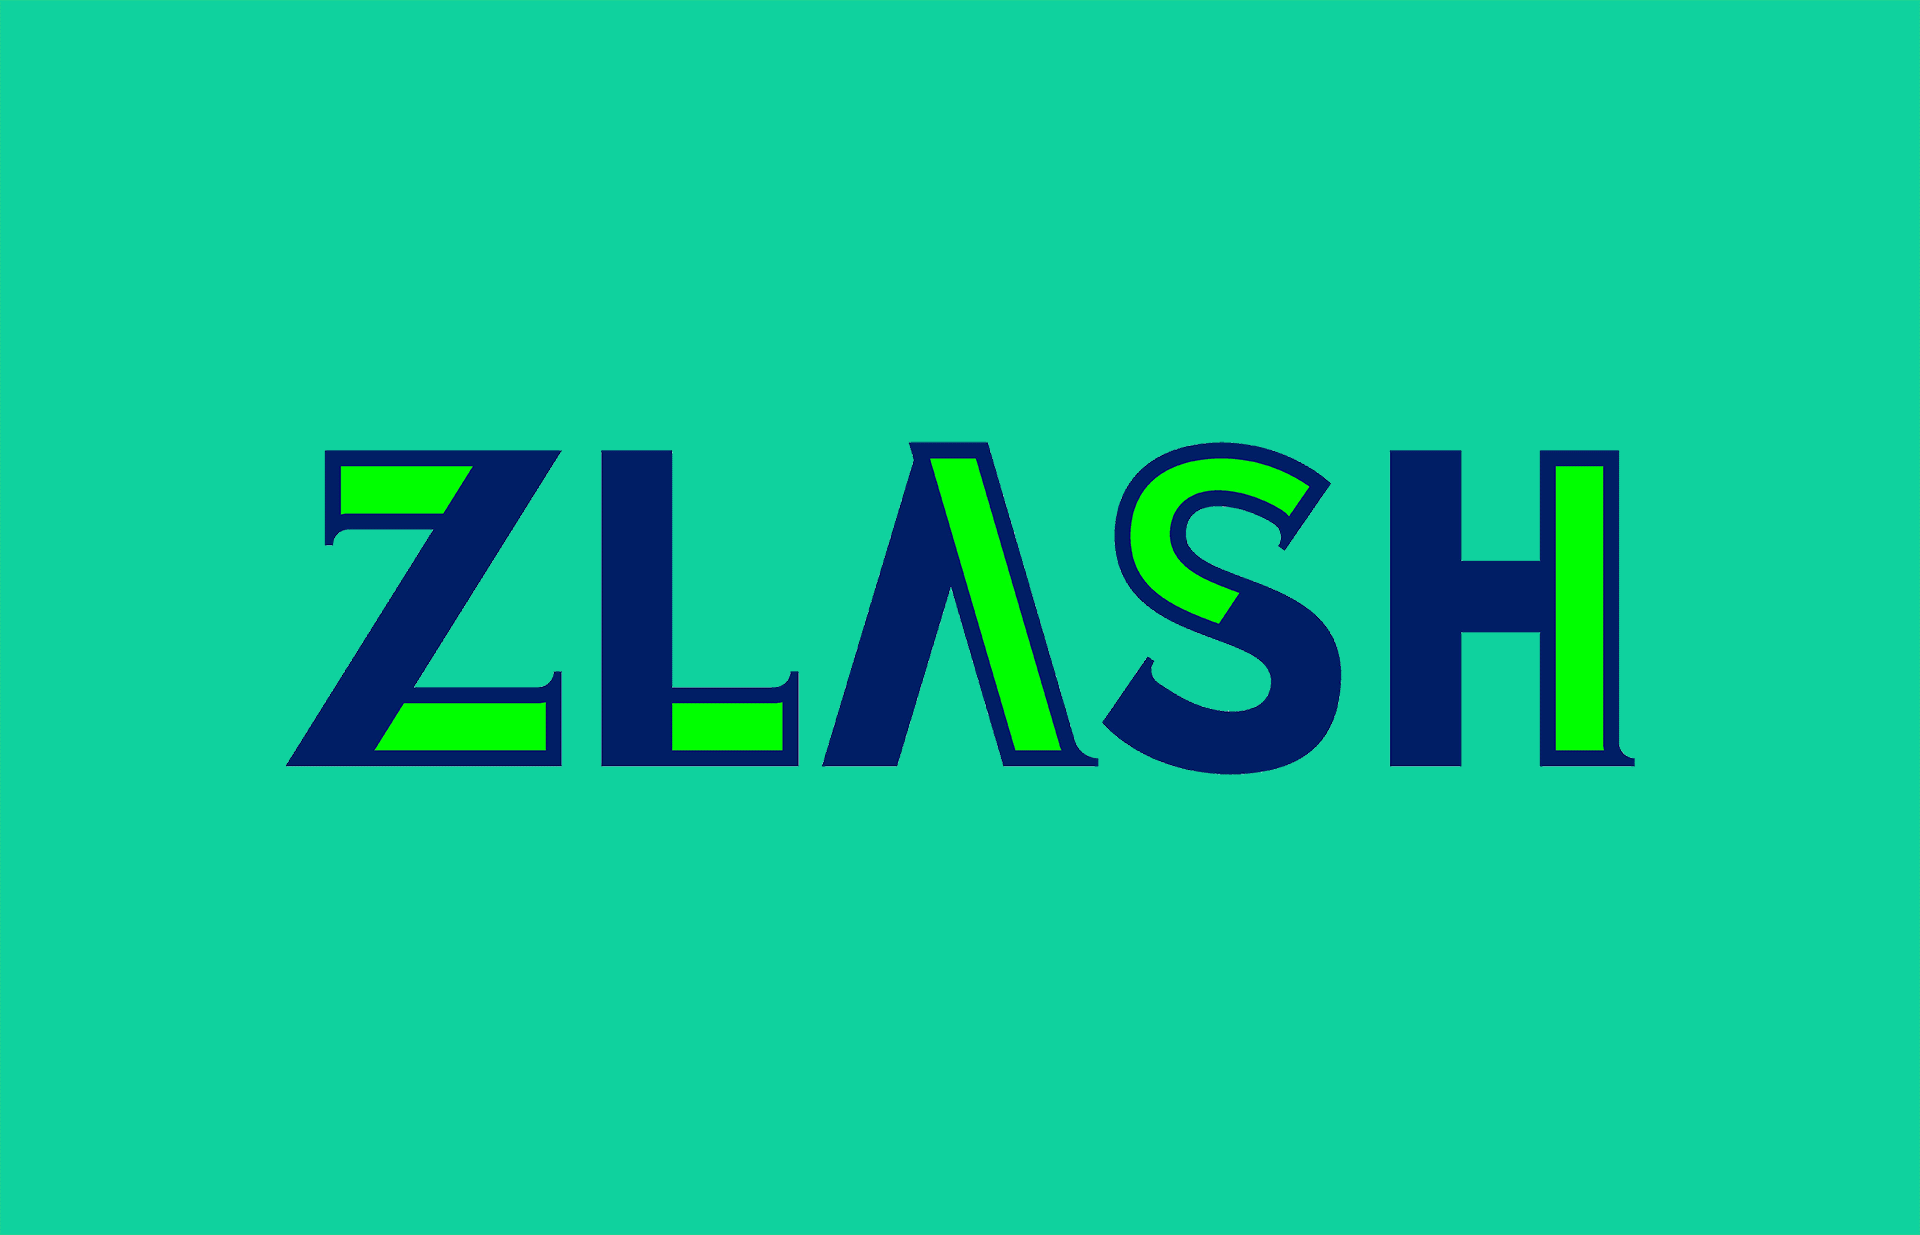 Total Branding and design for Slash! Zlash watches!